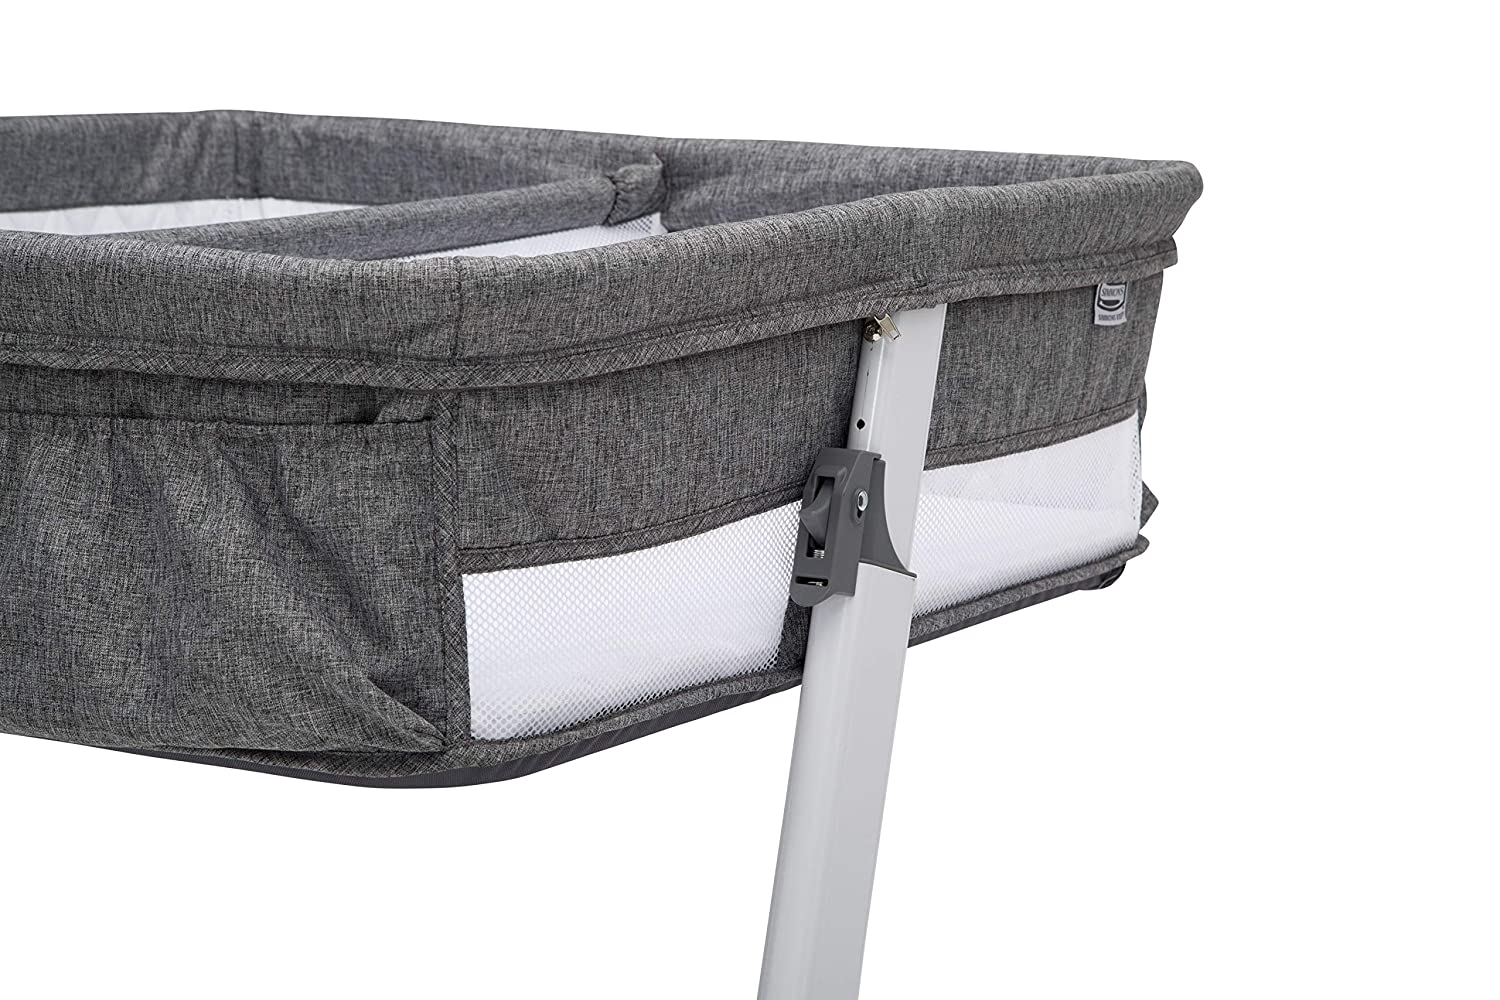 Simmons Kids By The Bed City Sleeper Bassinet for Twins - Adjustable Height Portable Crib with Wheels & Airflow Mesh, Grey Tweed